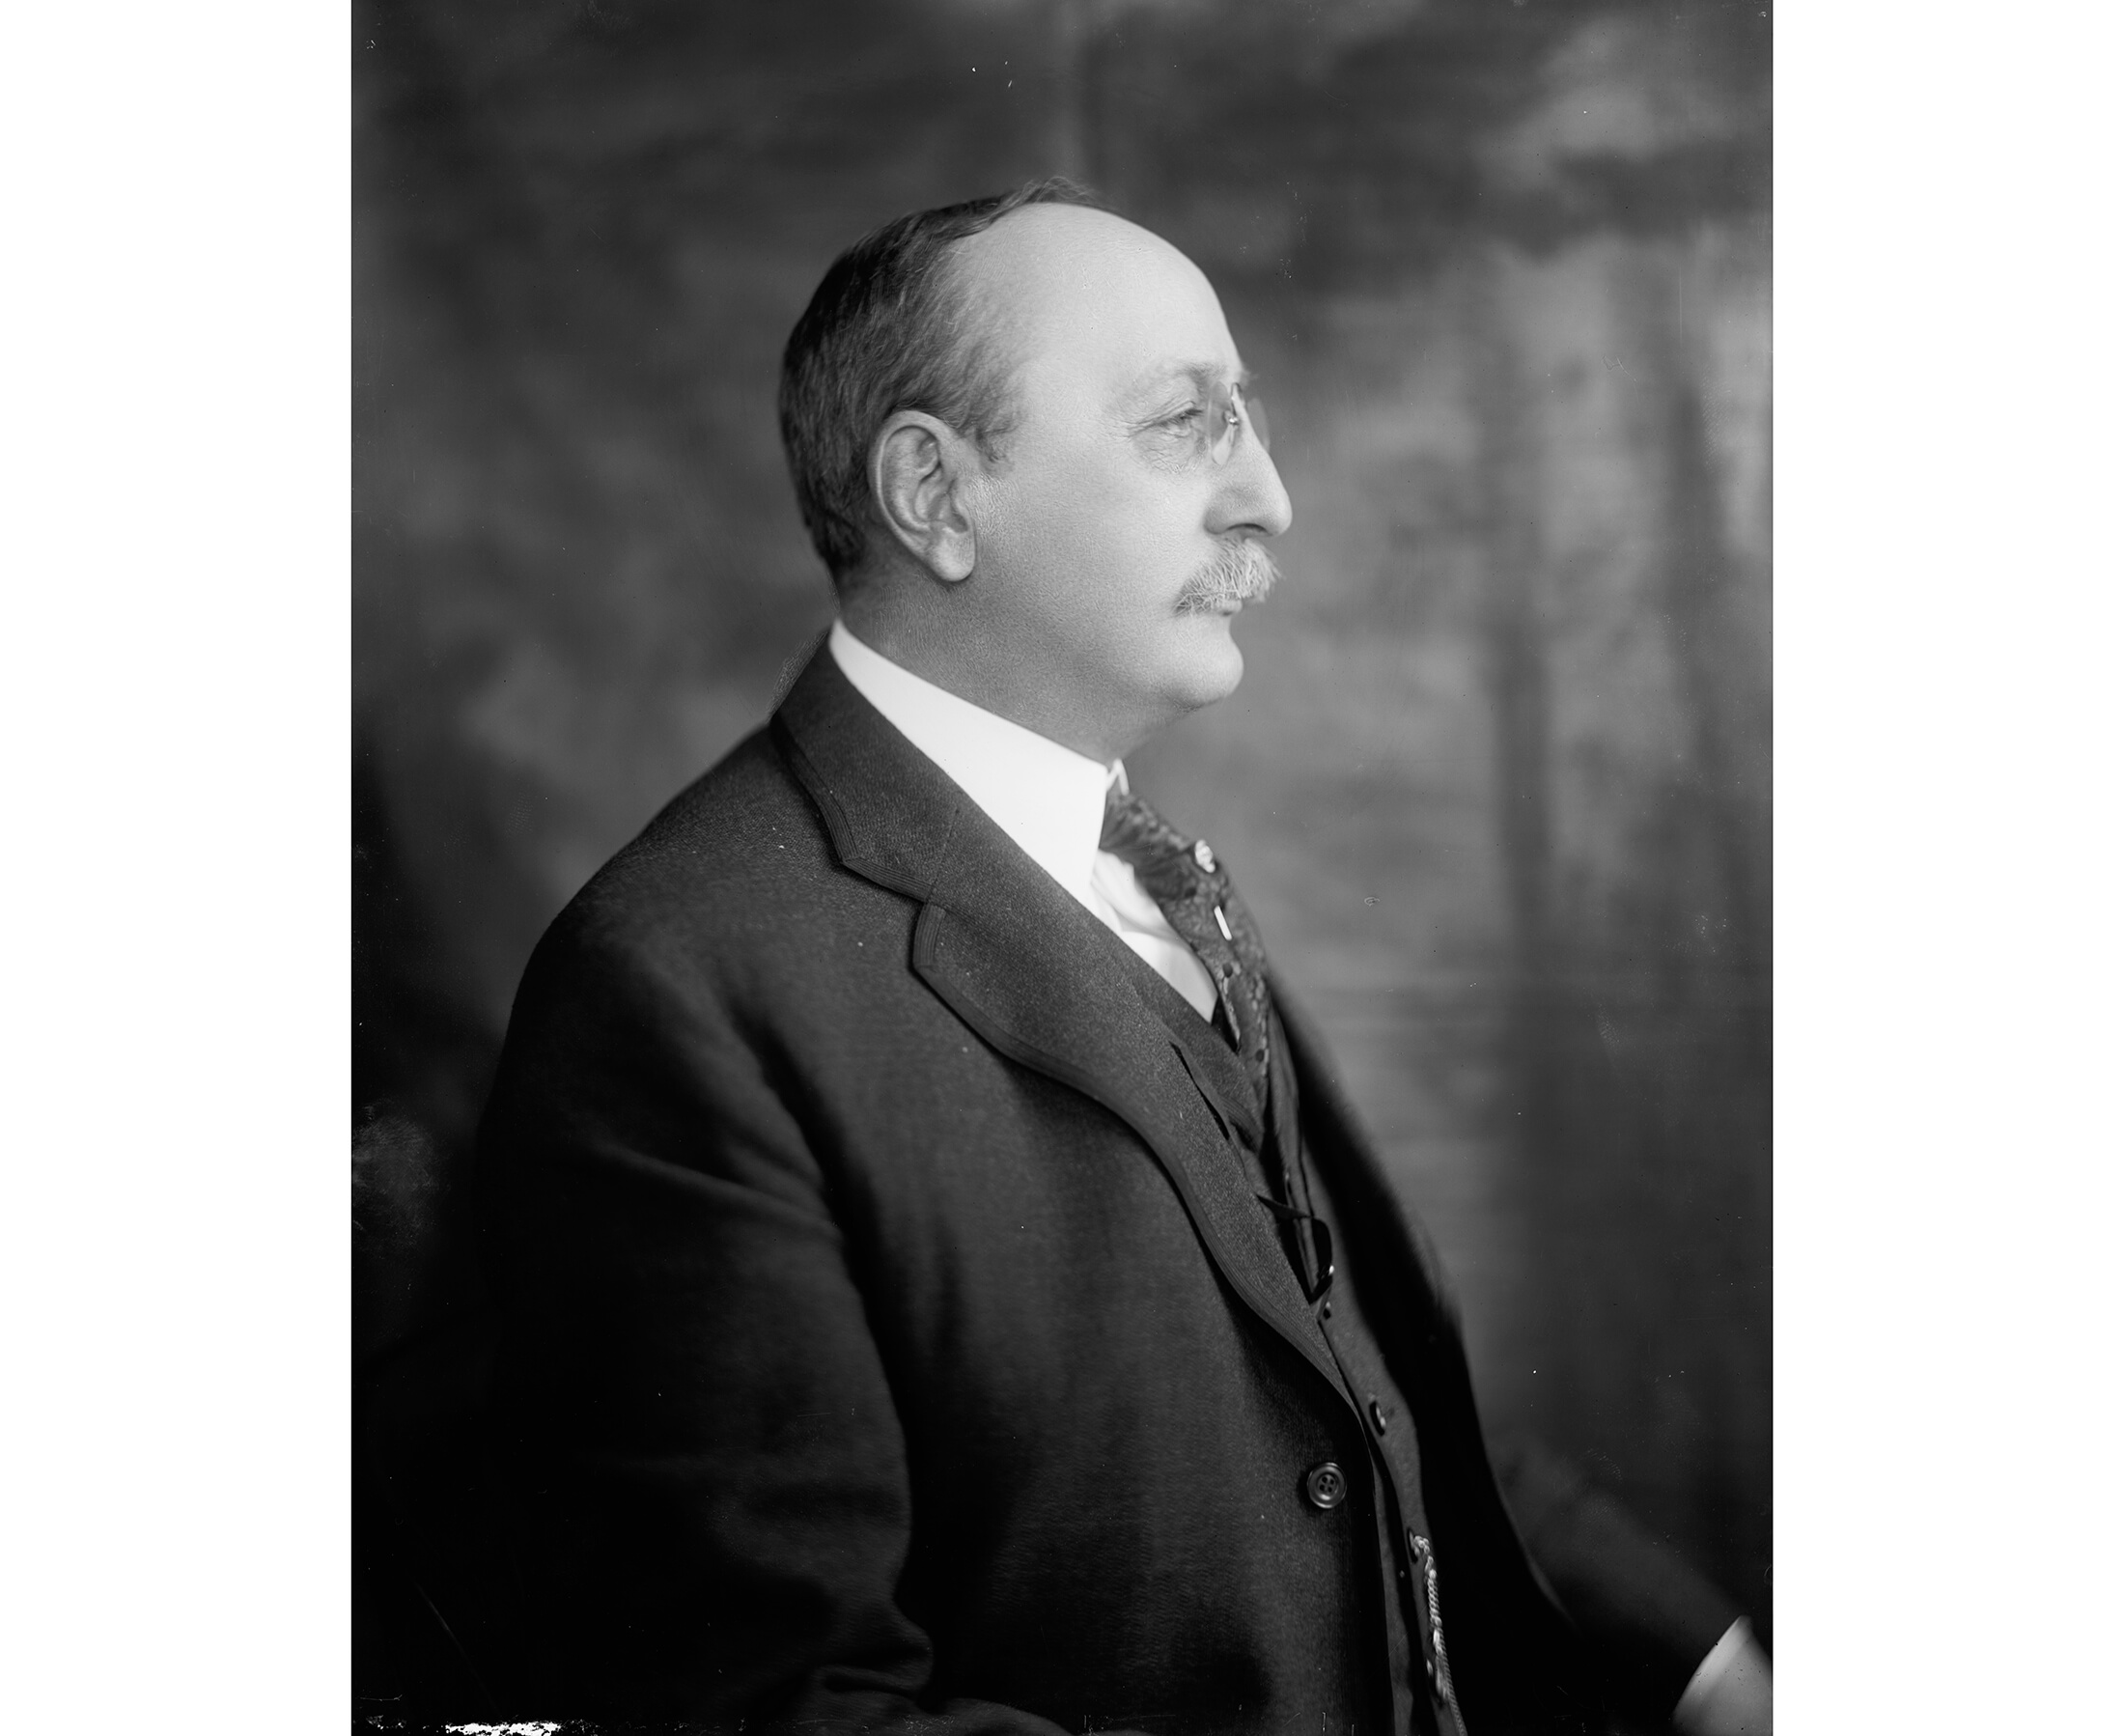 a black and white profile portrait of gilbert in a suite and tie